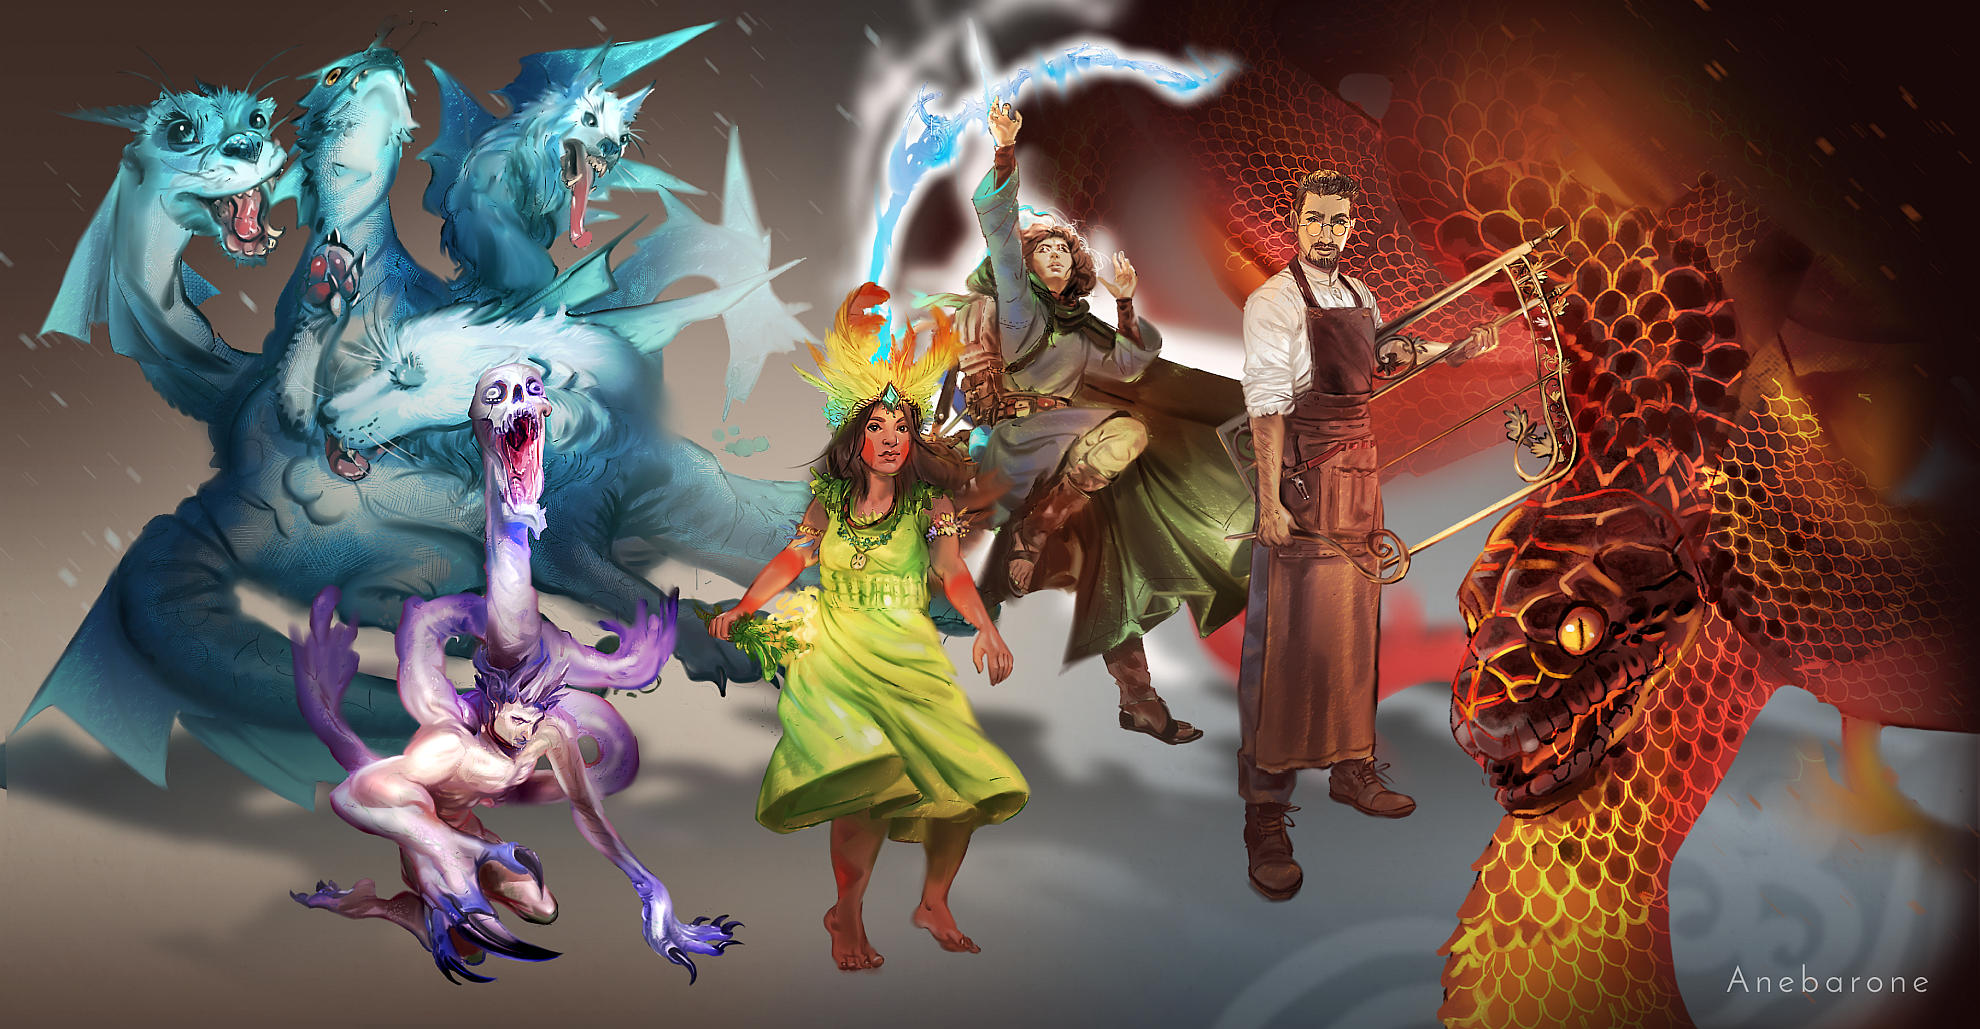 A concept art style lineup of 6 fantasy-themed characters.